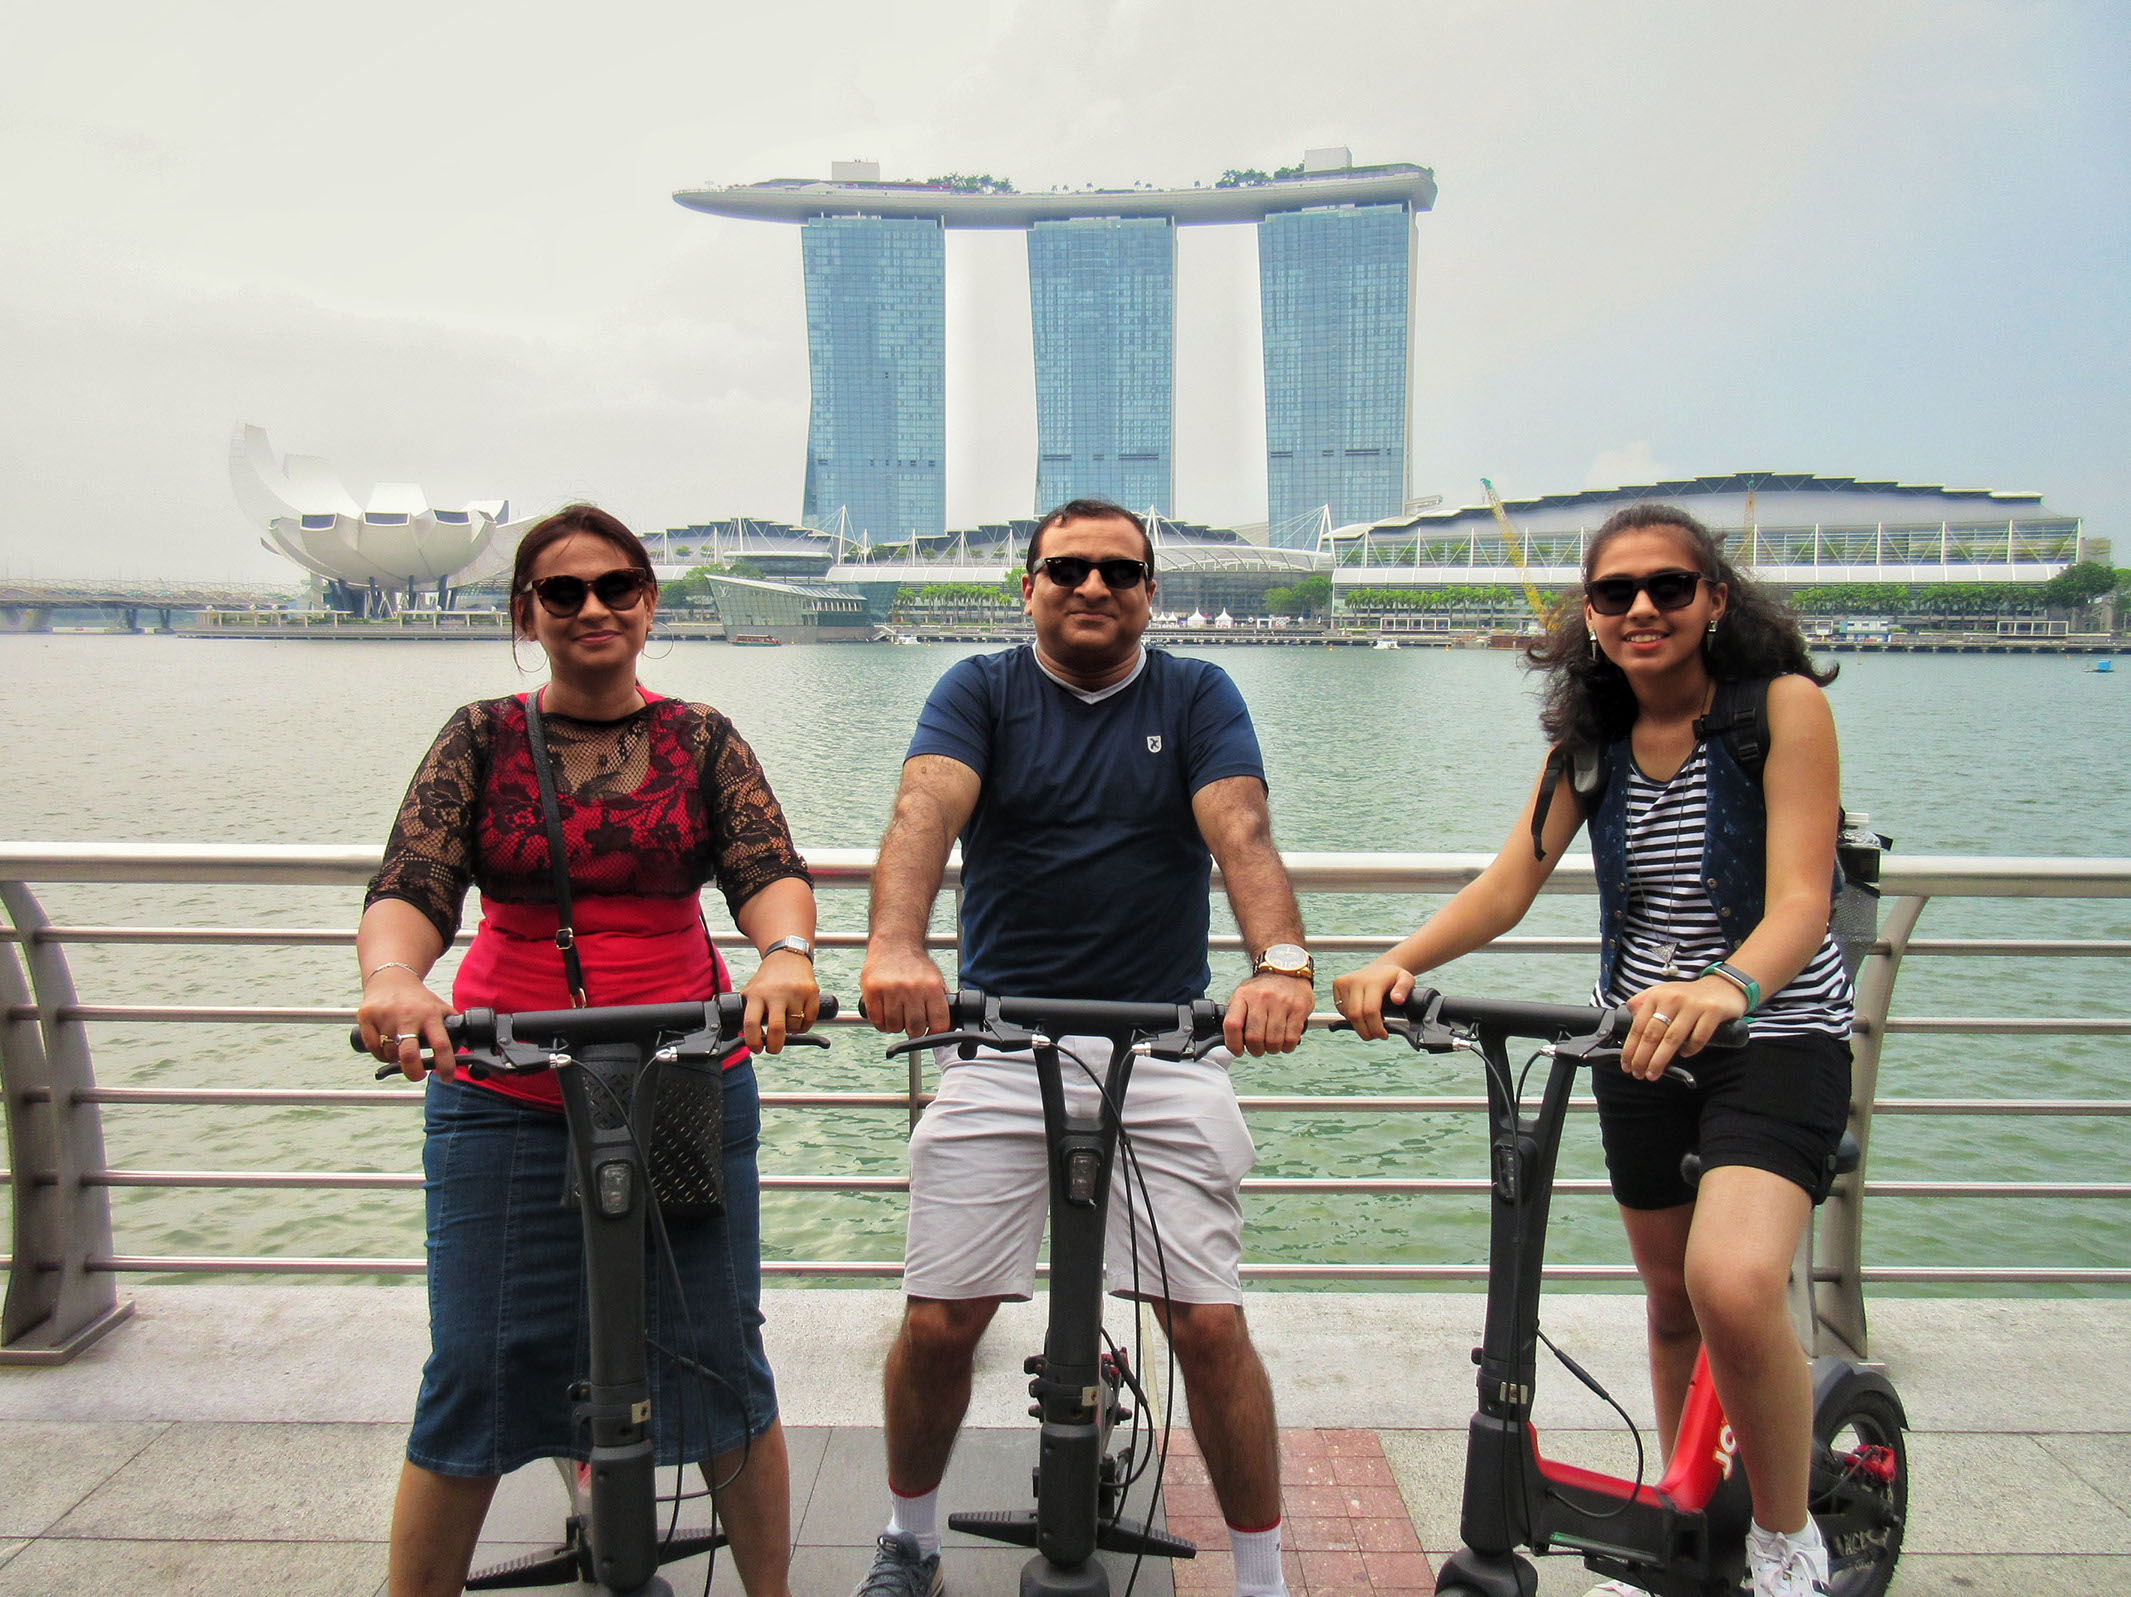 Having fun touring the city of Singapore on electric scooters at Marina Bay Sands.